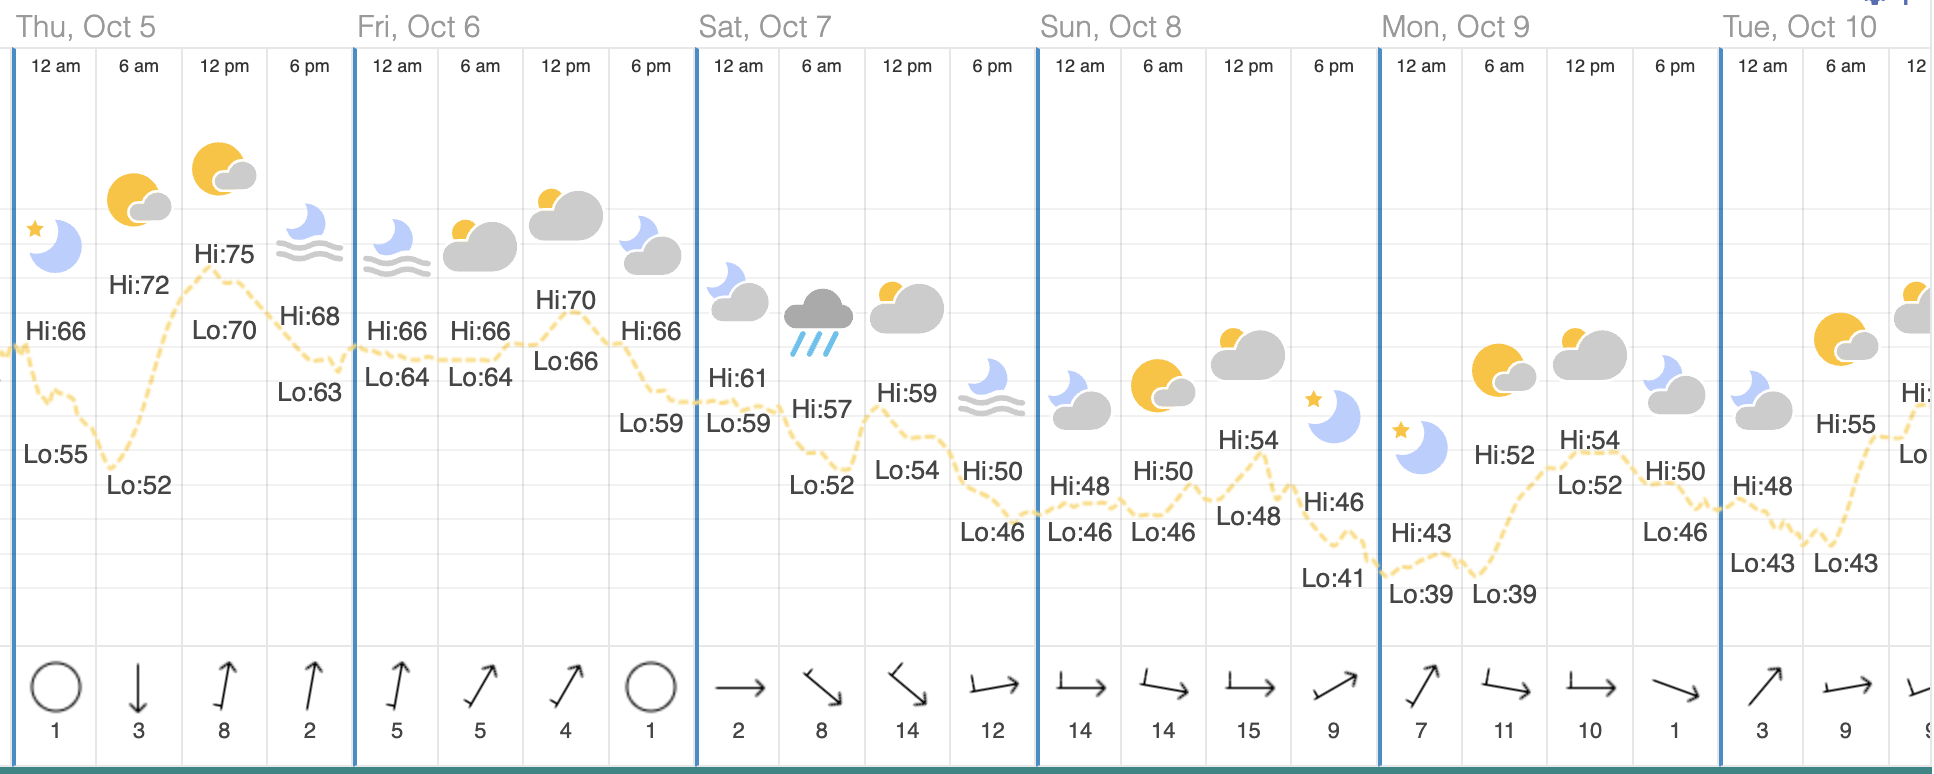 screenshot of weather forecast for Oct 5 - 9